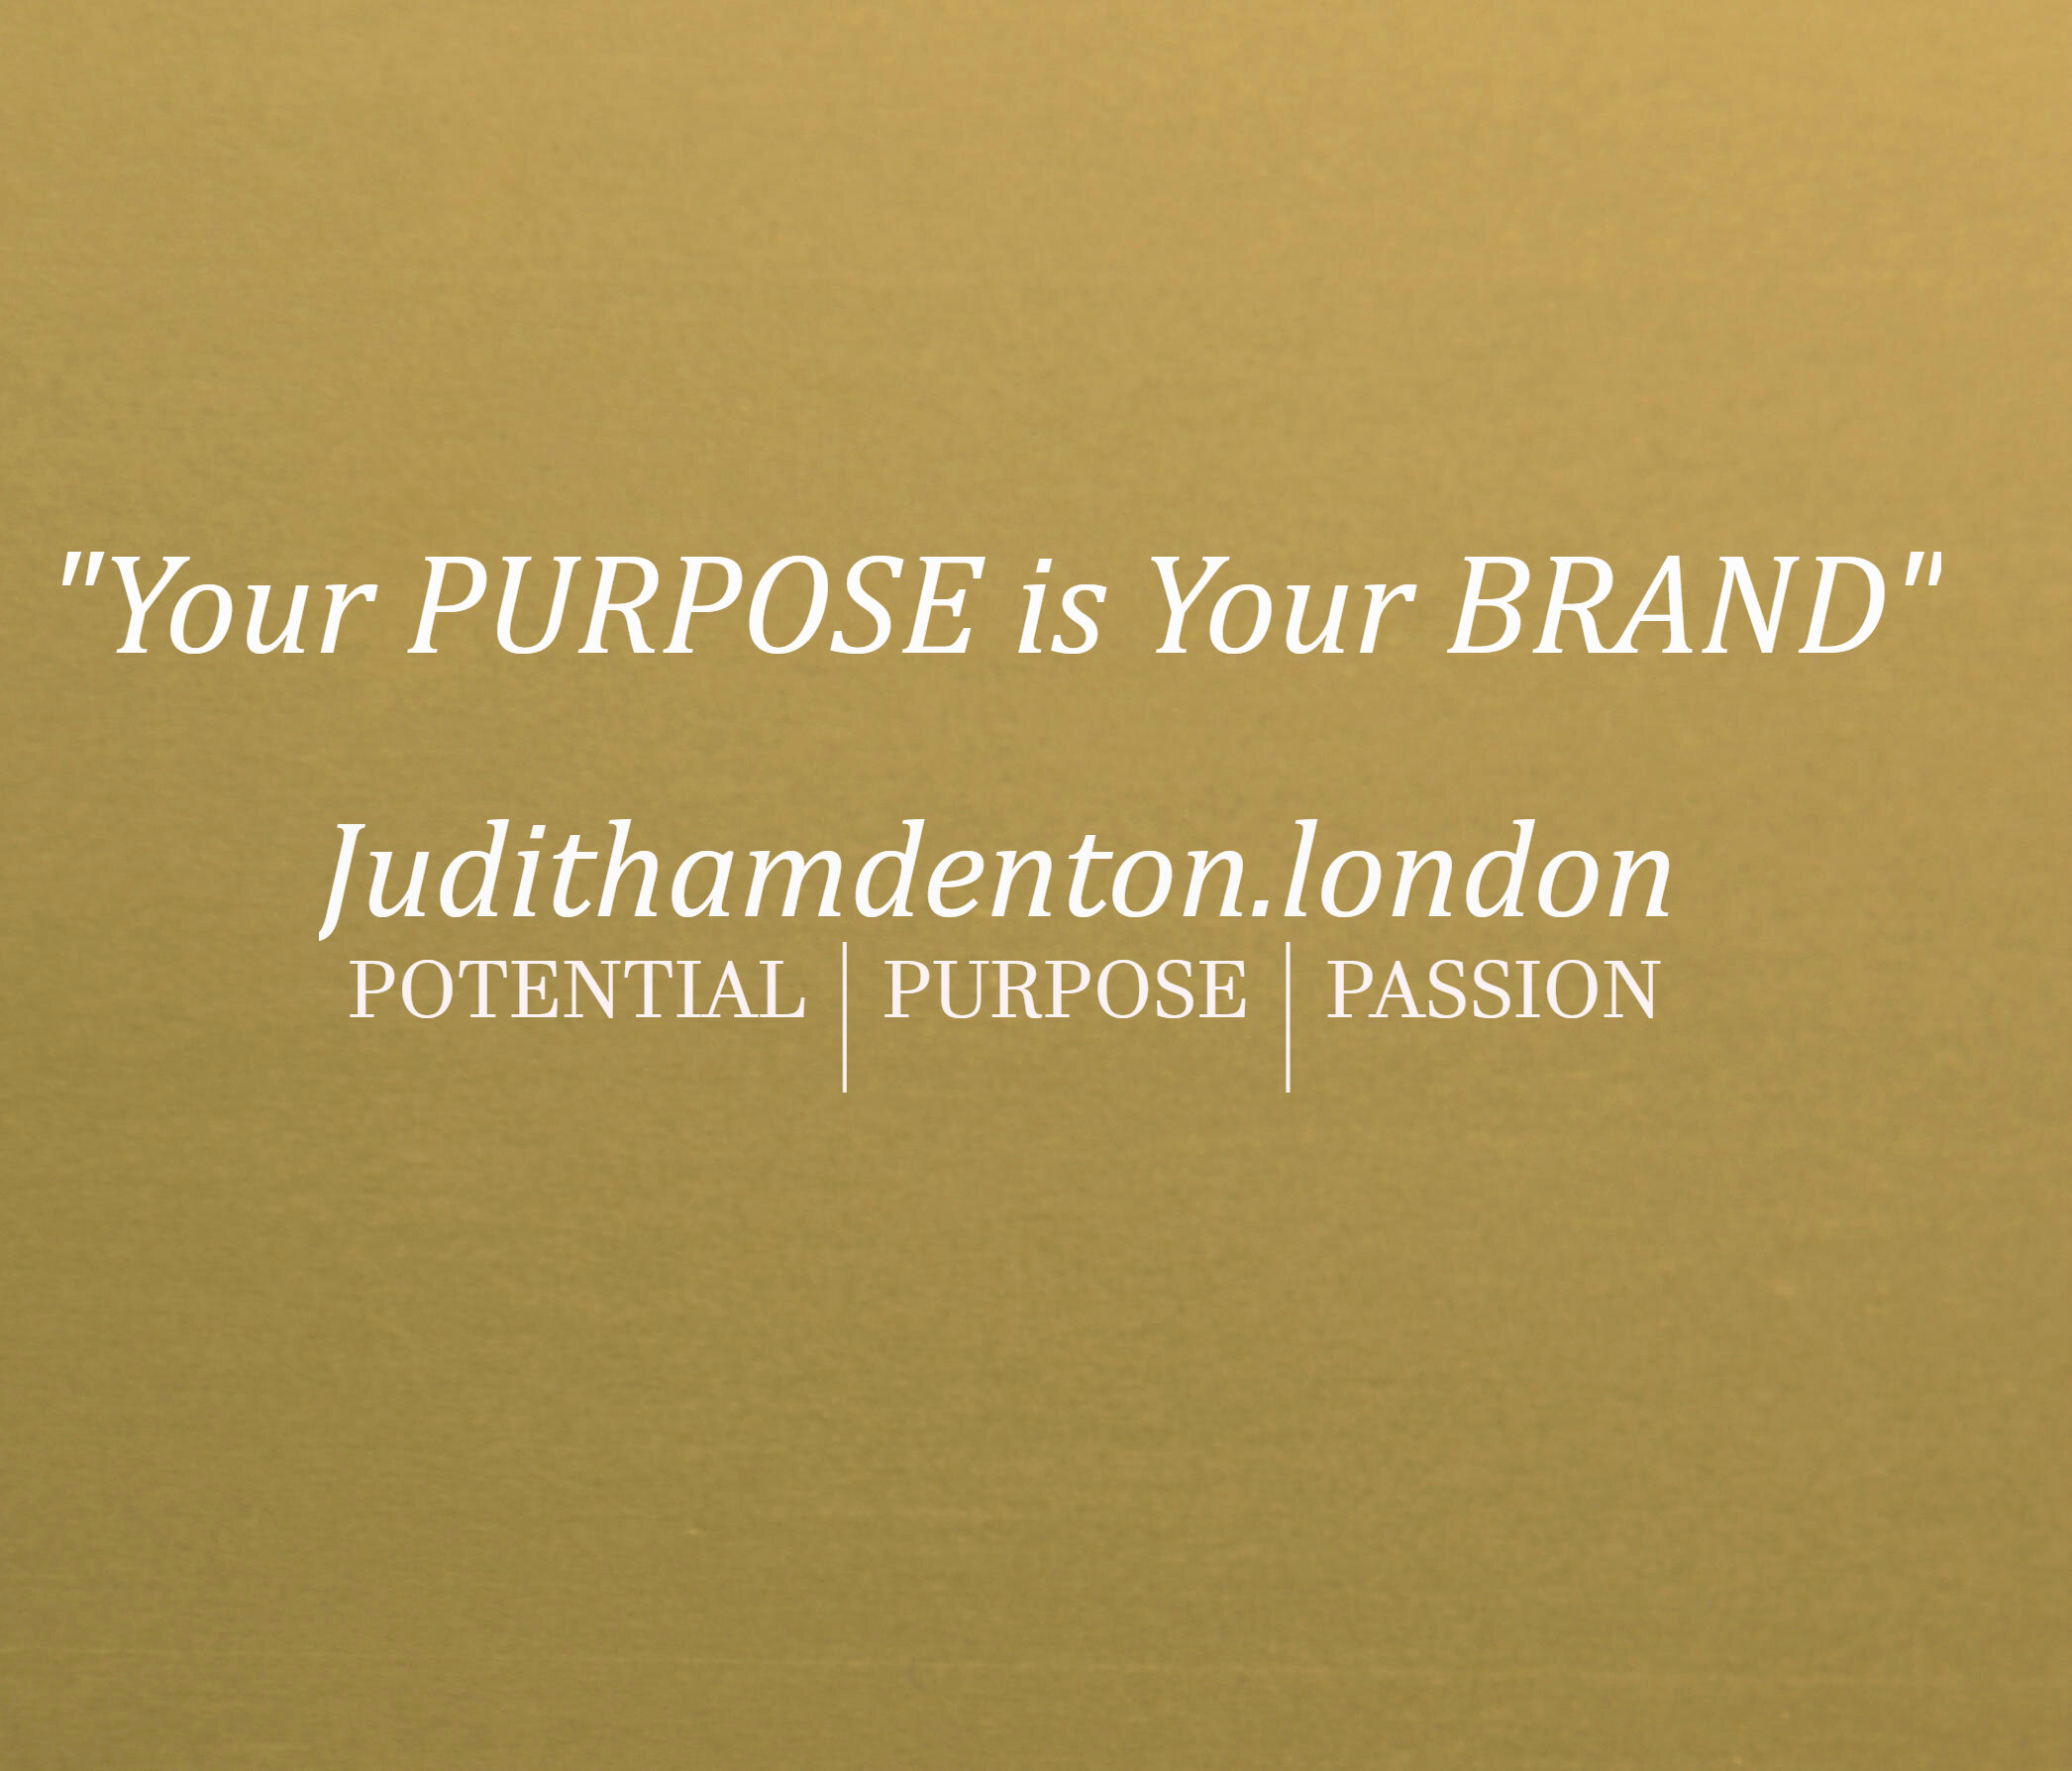 Your Purpose is Your Brand with site.jpg